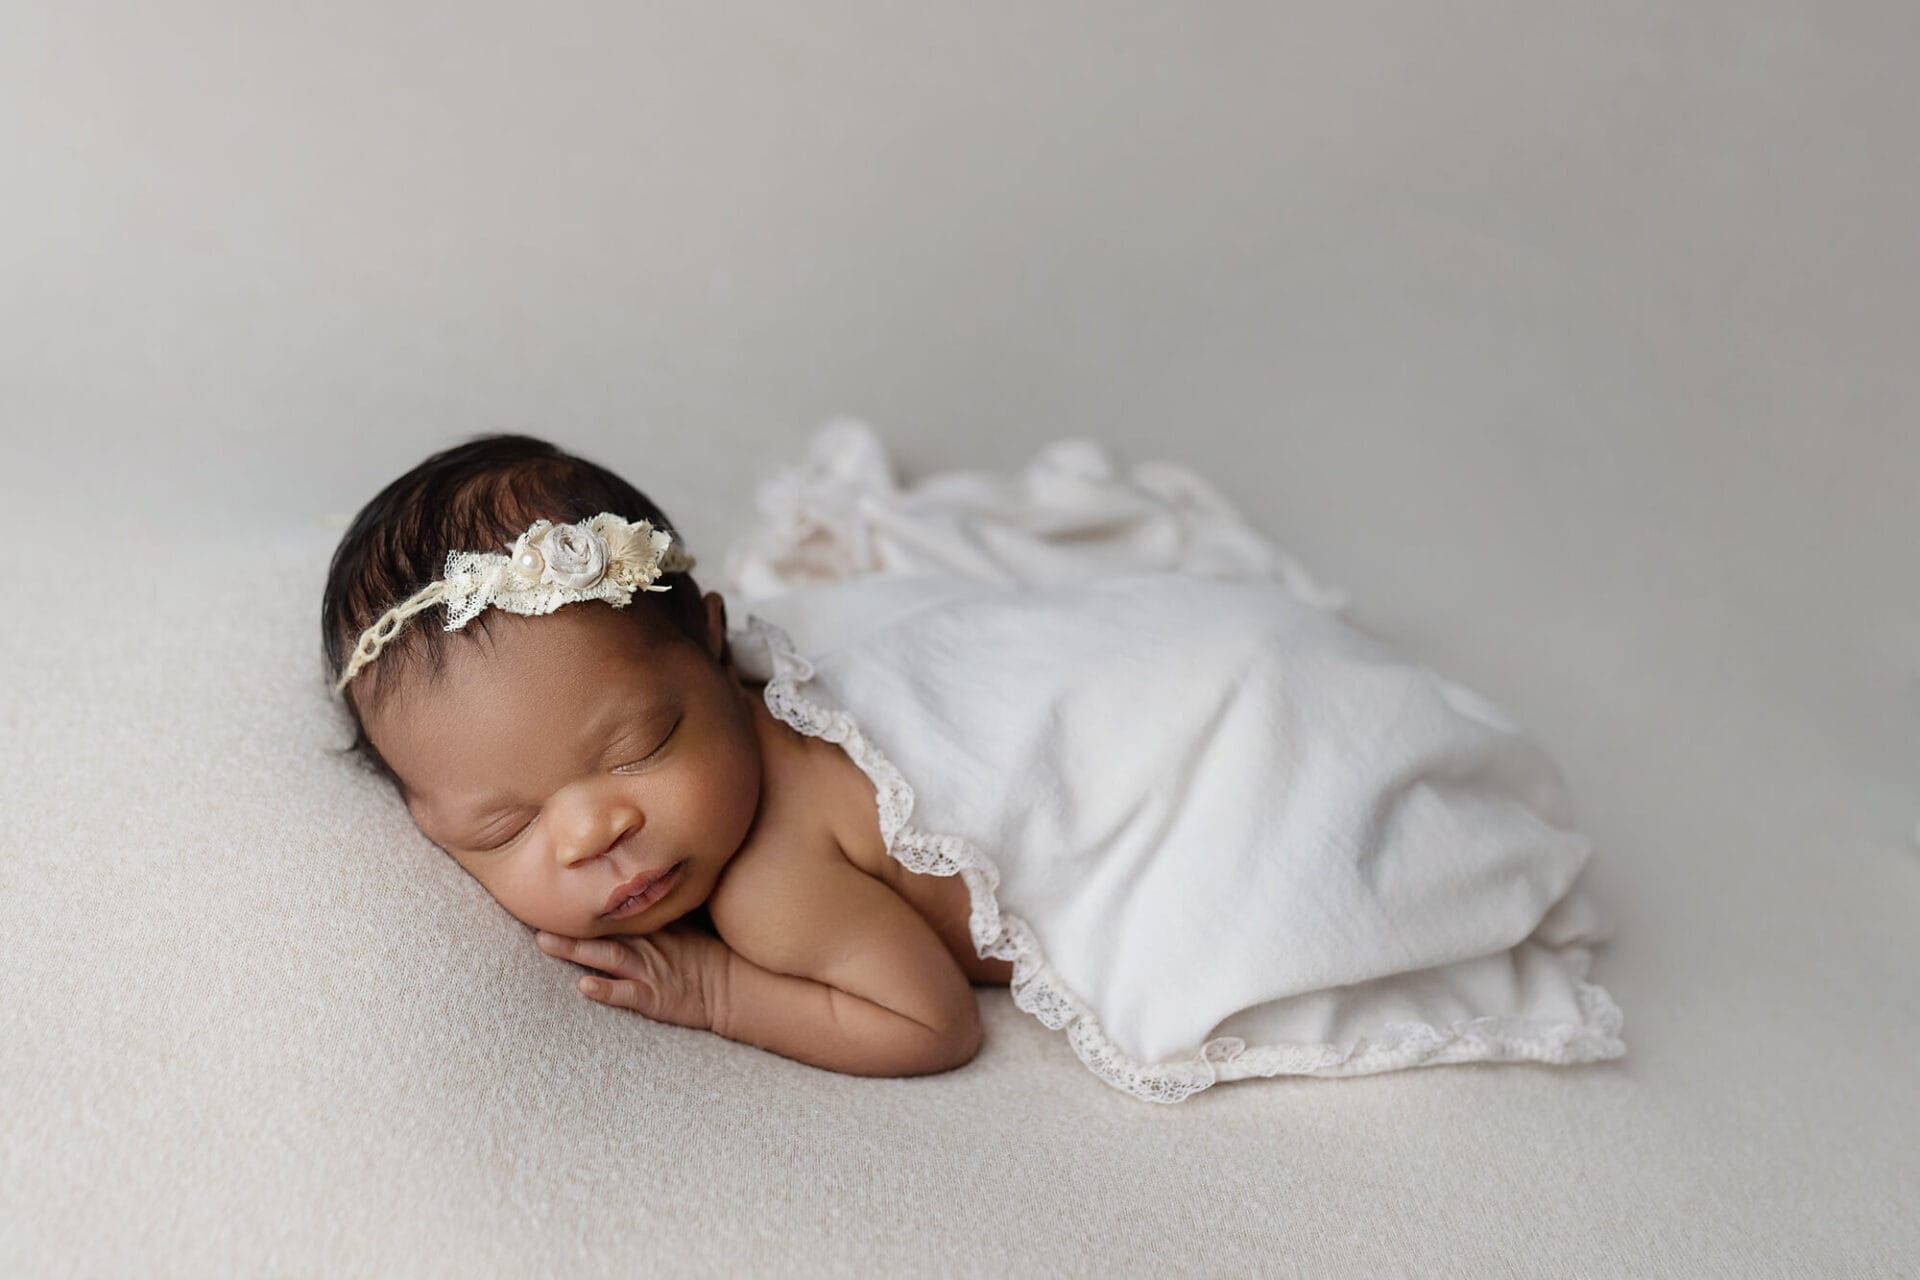 Newborn baby girl with ivory floral headband lying on cream backdrop with lace wrap.